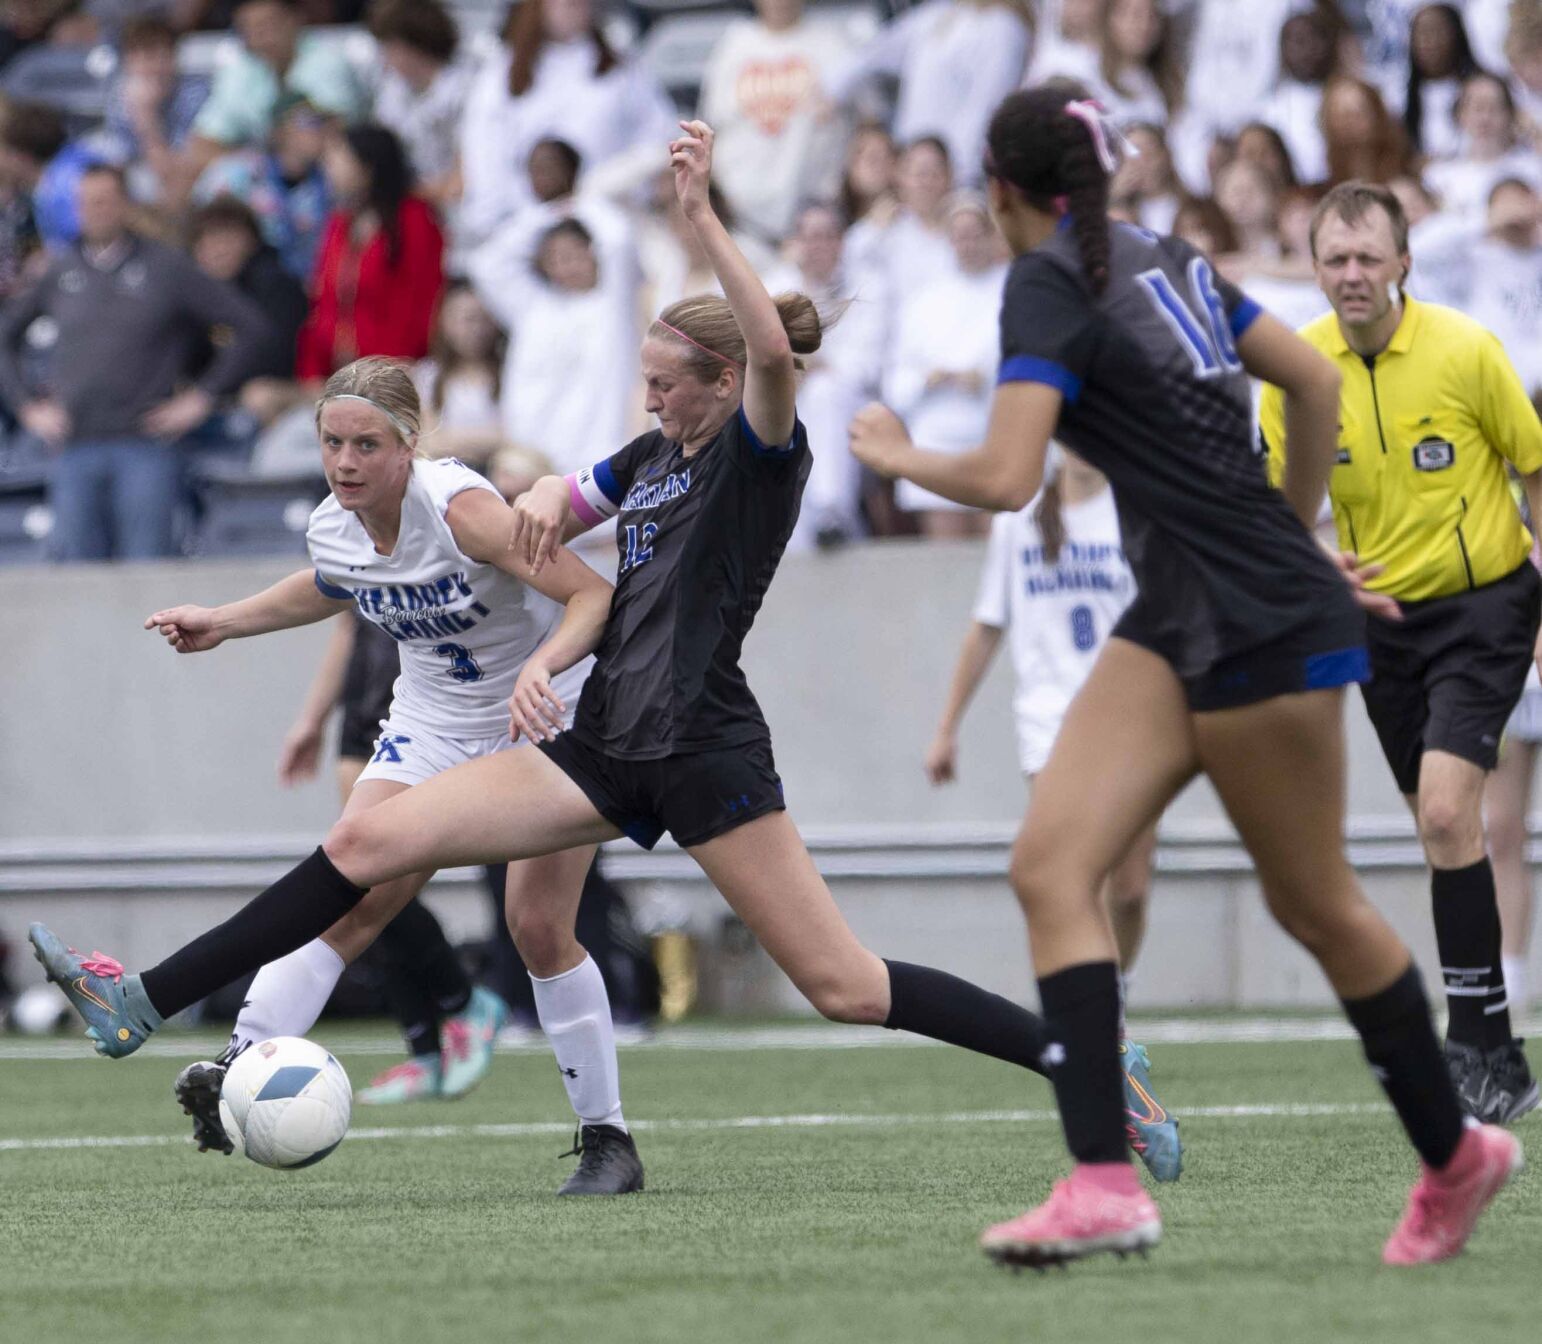 Omaha Marian Triumphs Over Kearney in State Soccer Championship Epic Battle